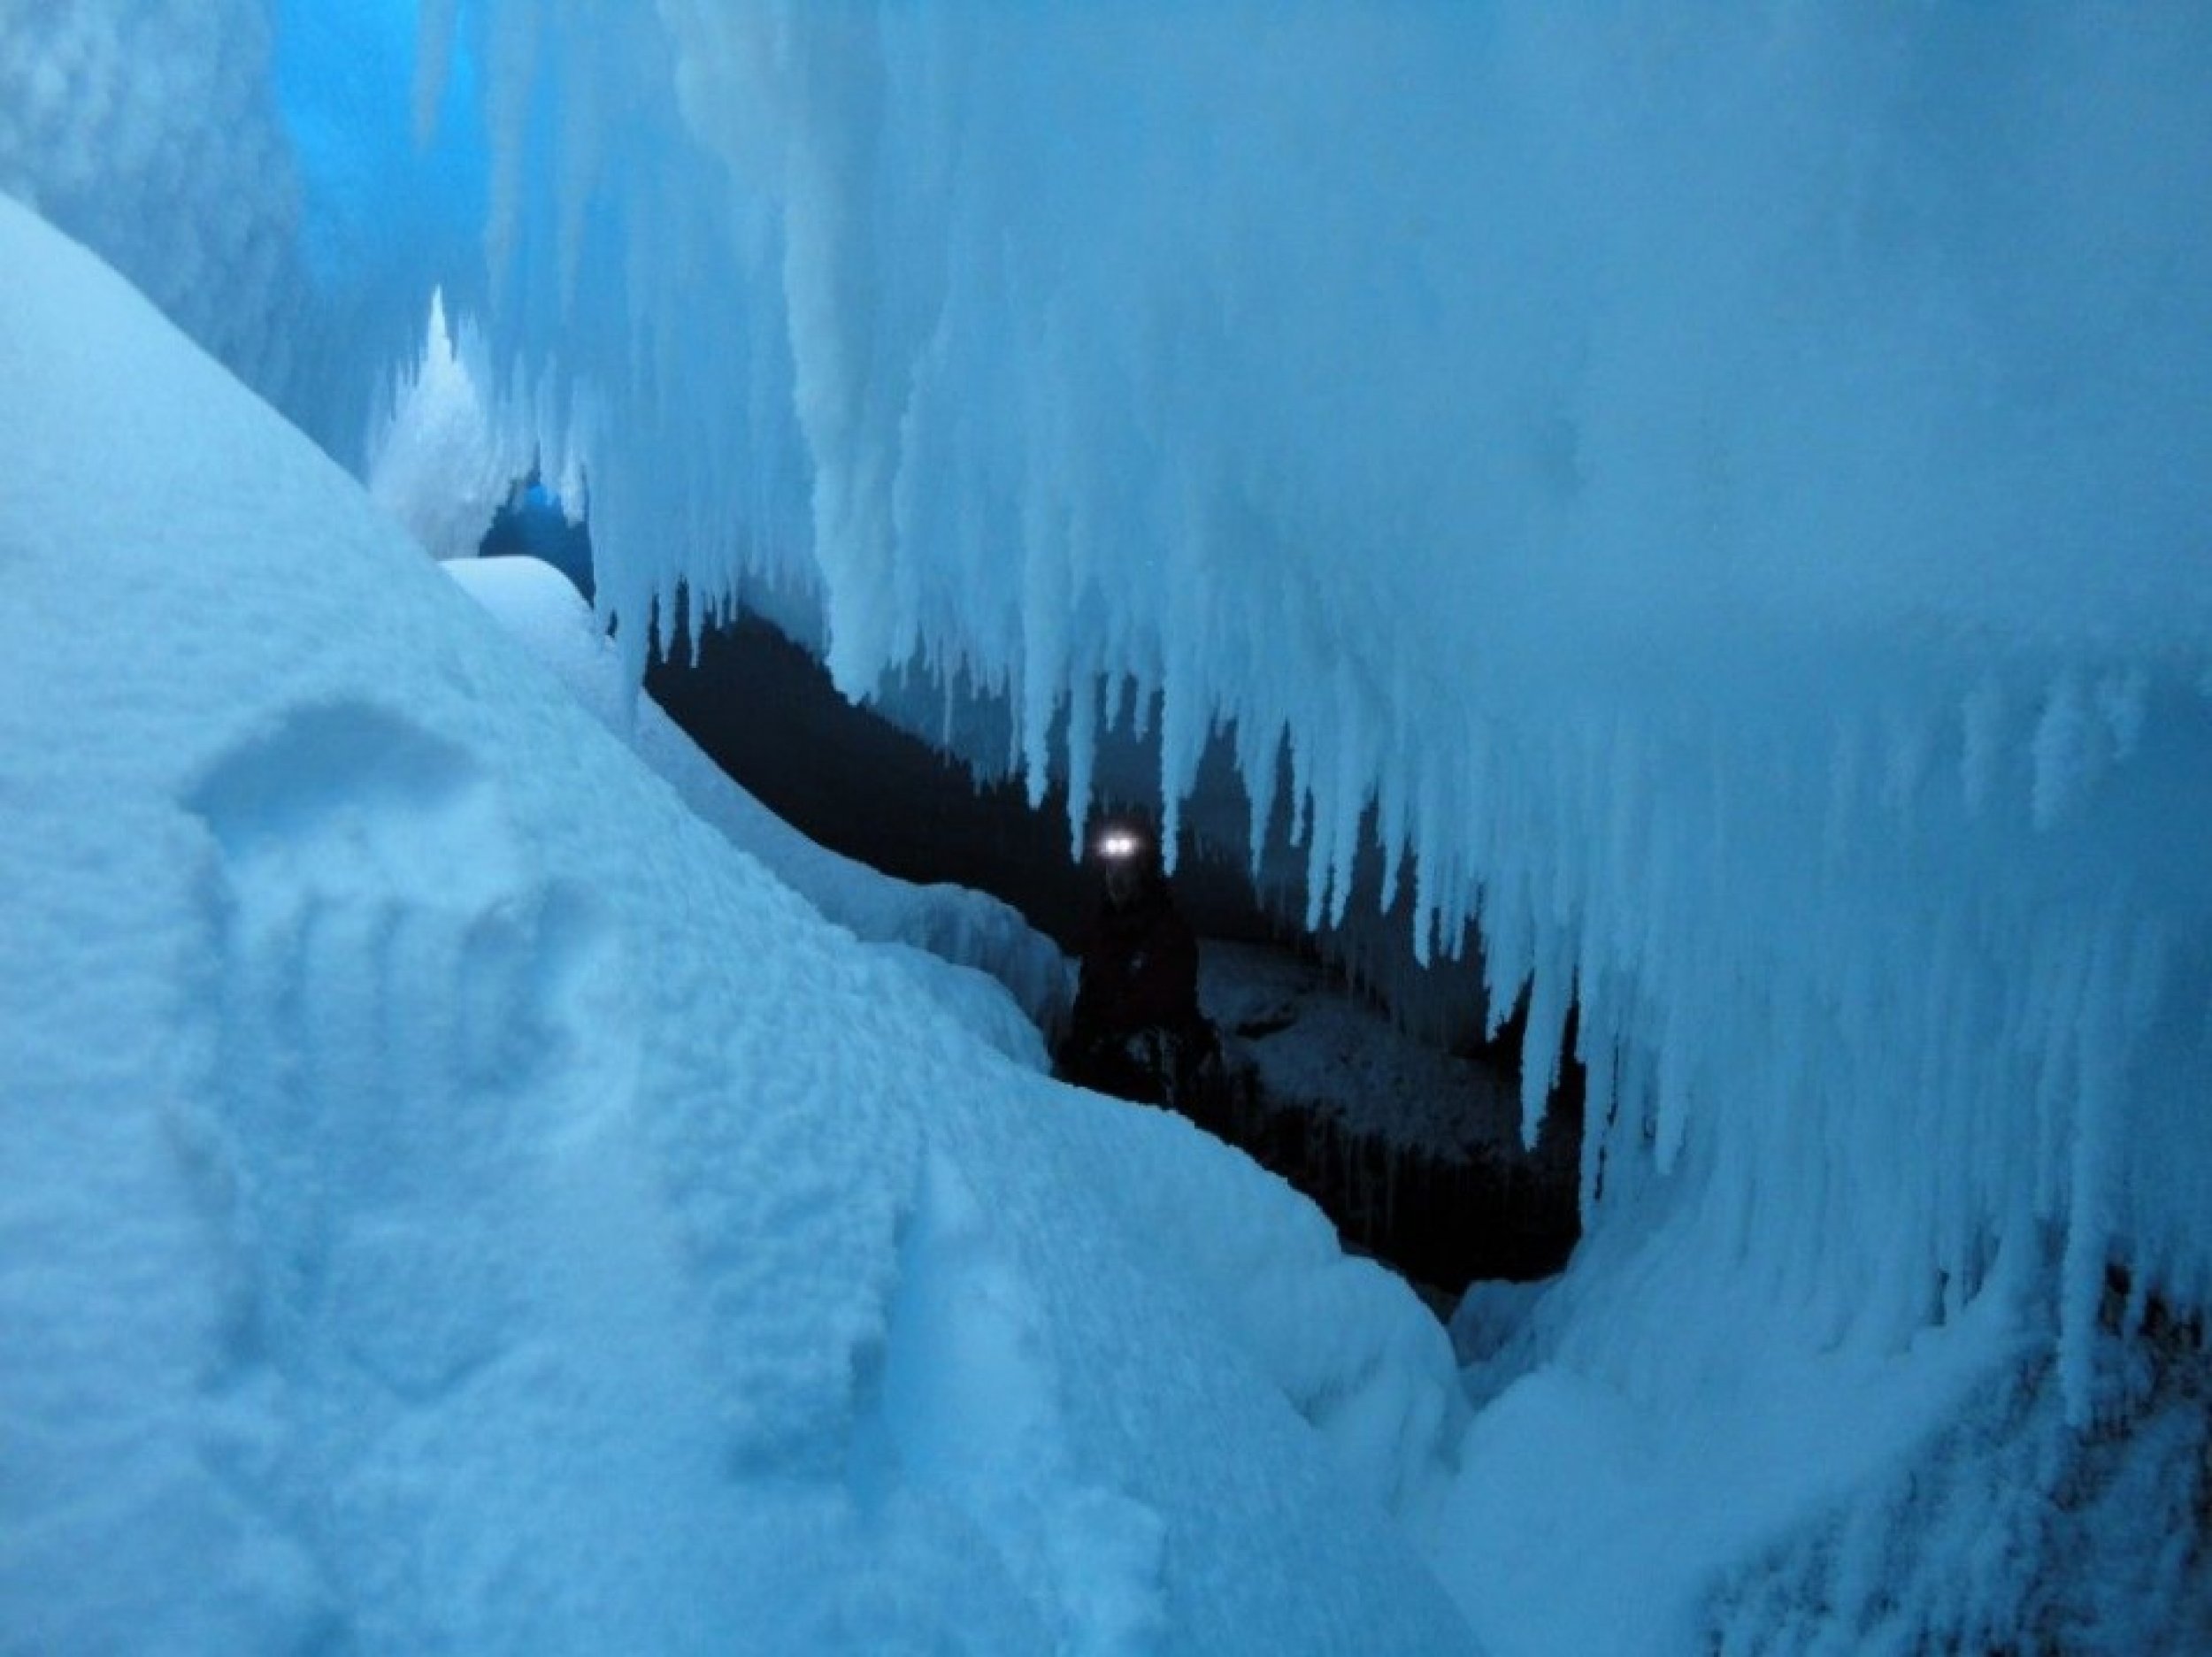 Stunning Images of Ice Caves on Antarcticas Active Volcano Mt. Erebus Revealed